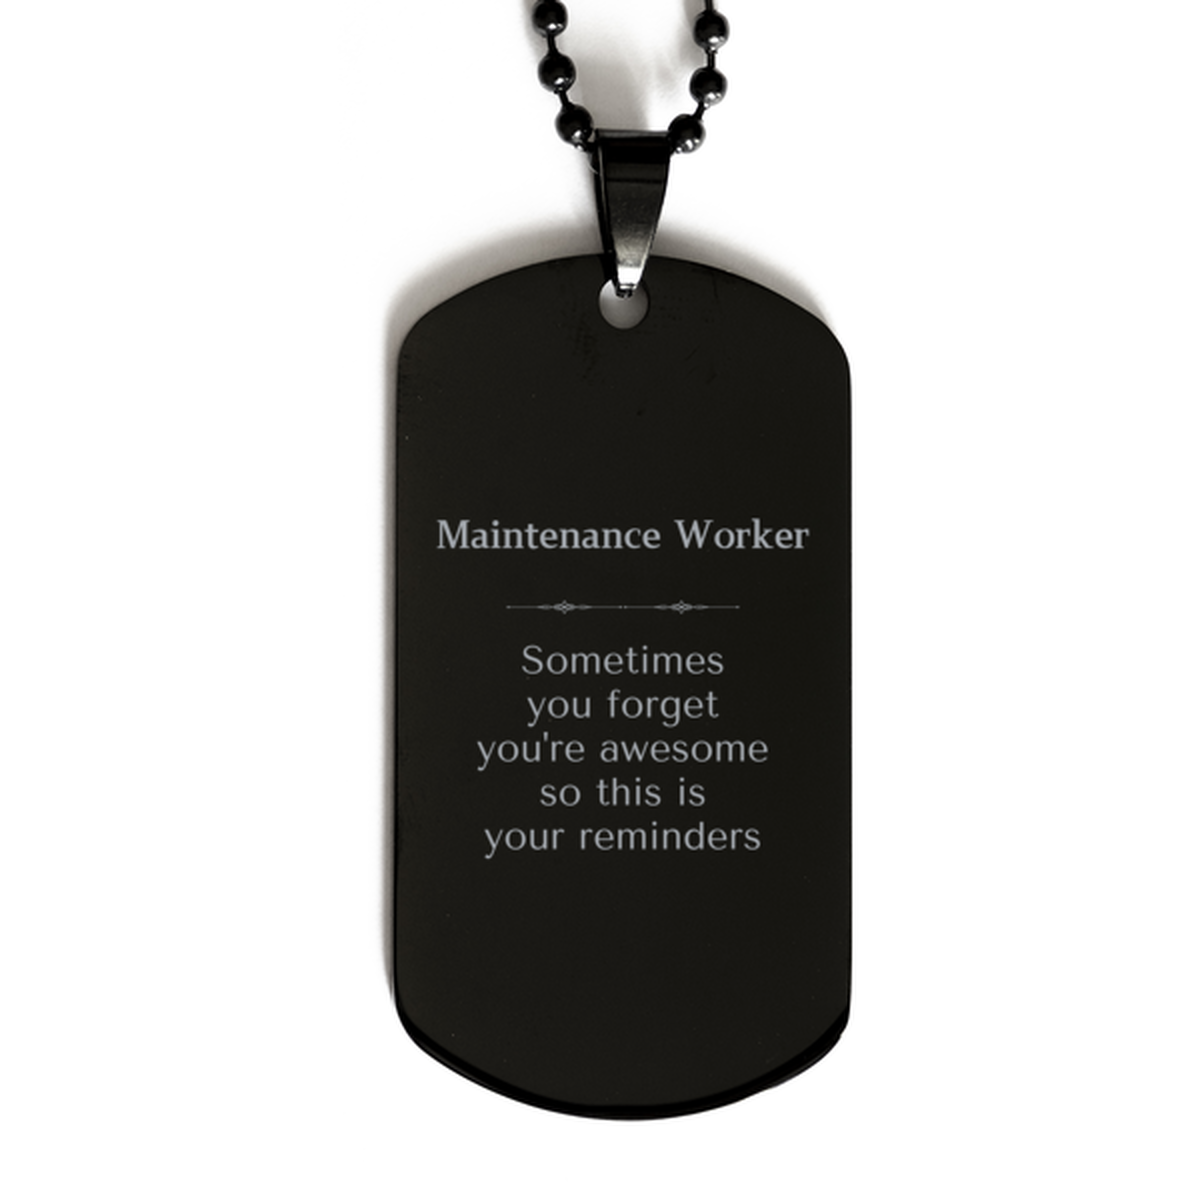 Sentimental Maintenance Worker Black Dog Tag, Maintenance Worker Sometimes you forget you're awesome so this is your reminders, Graduation Christmas Birthday Gifts for Maintenance Worker, Men, Women, Coworkers